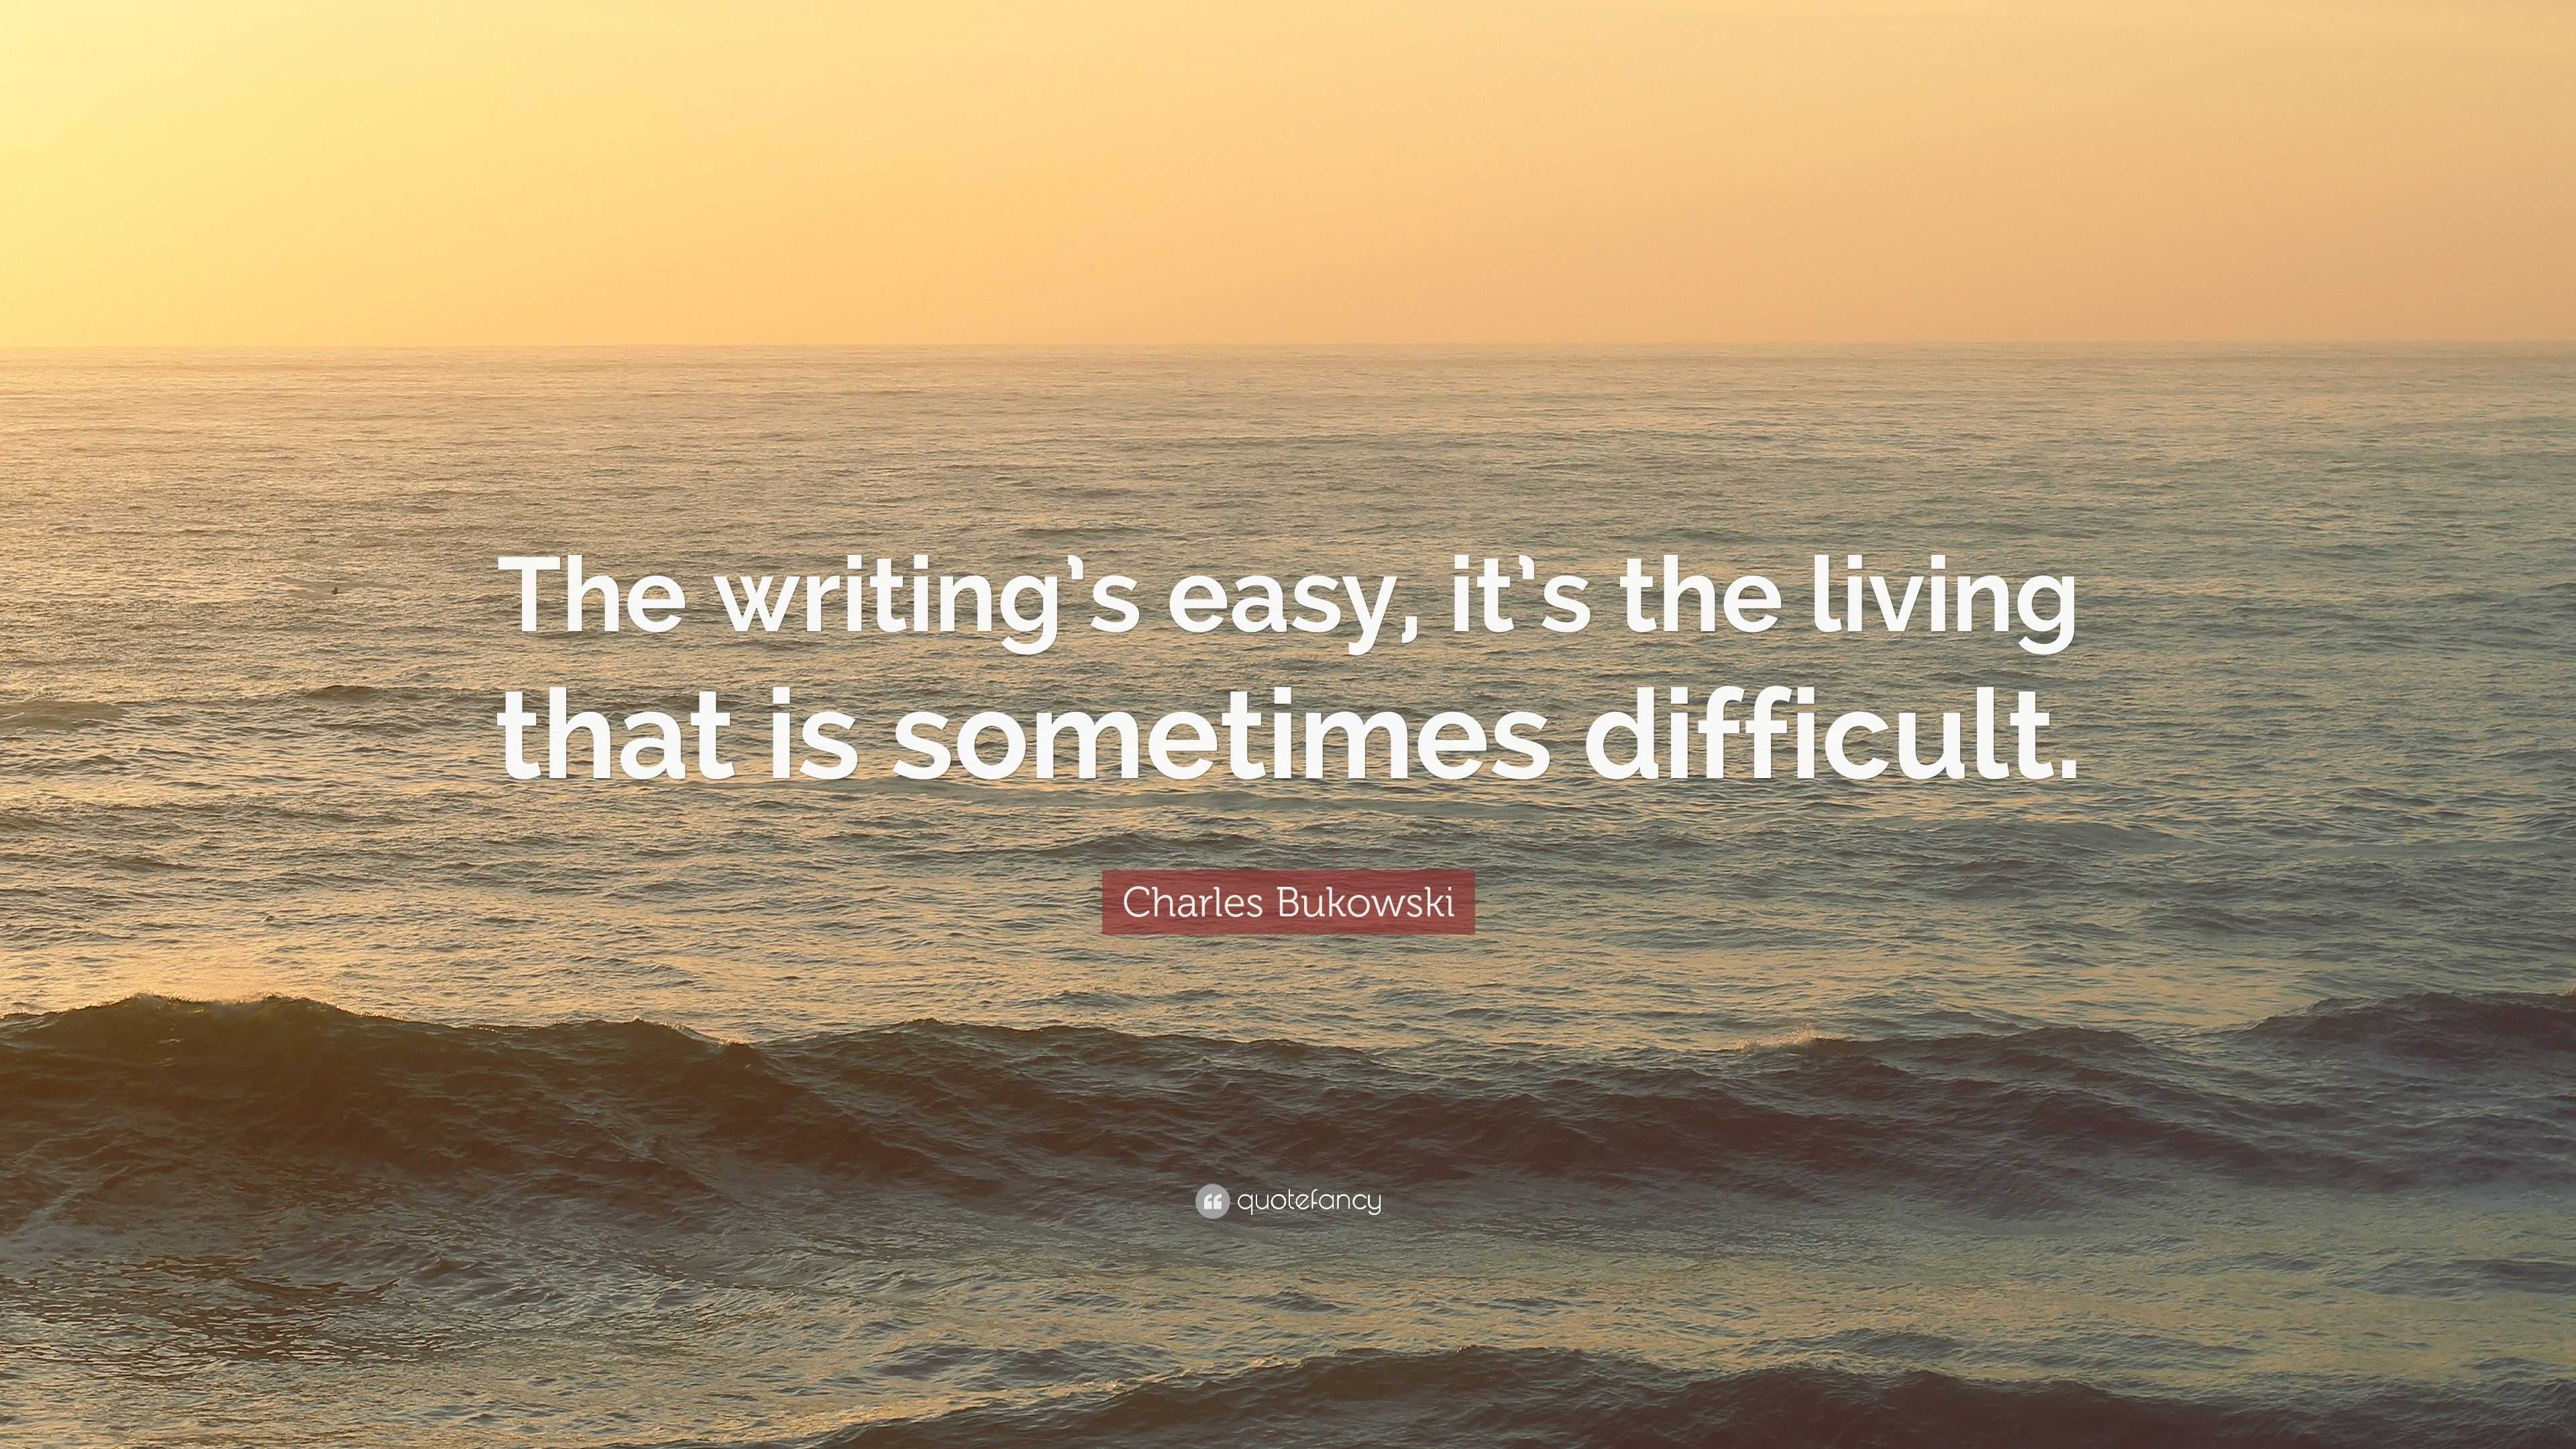 Charles Bukowski Quote: “The writing's easy, it's the living that is  sometimes difficult.”